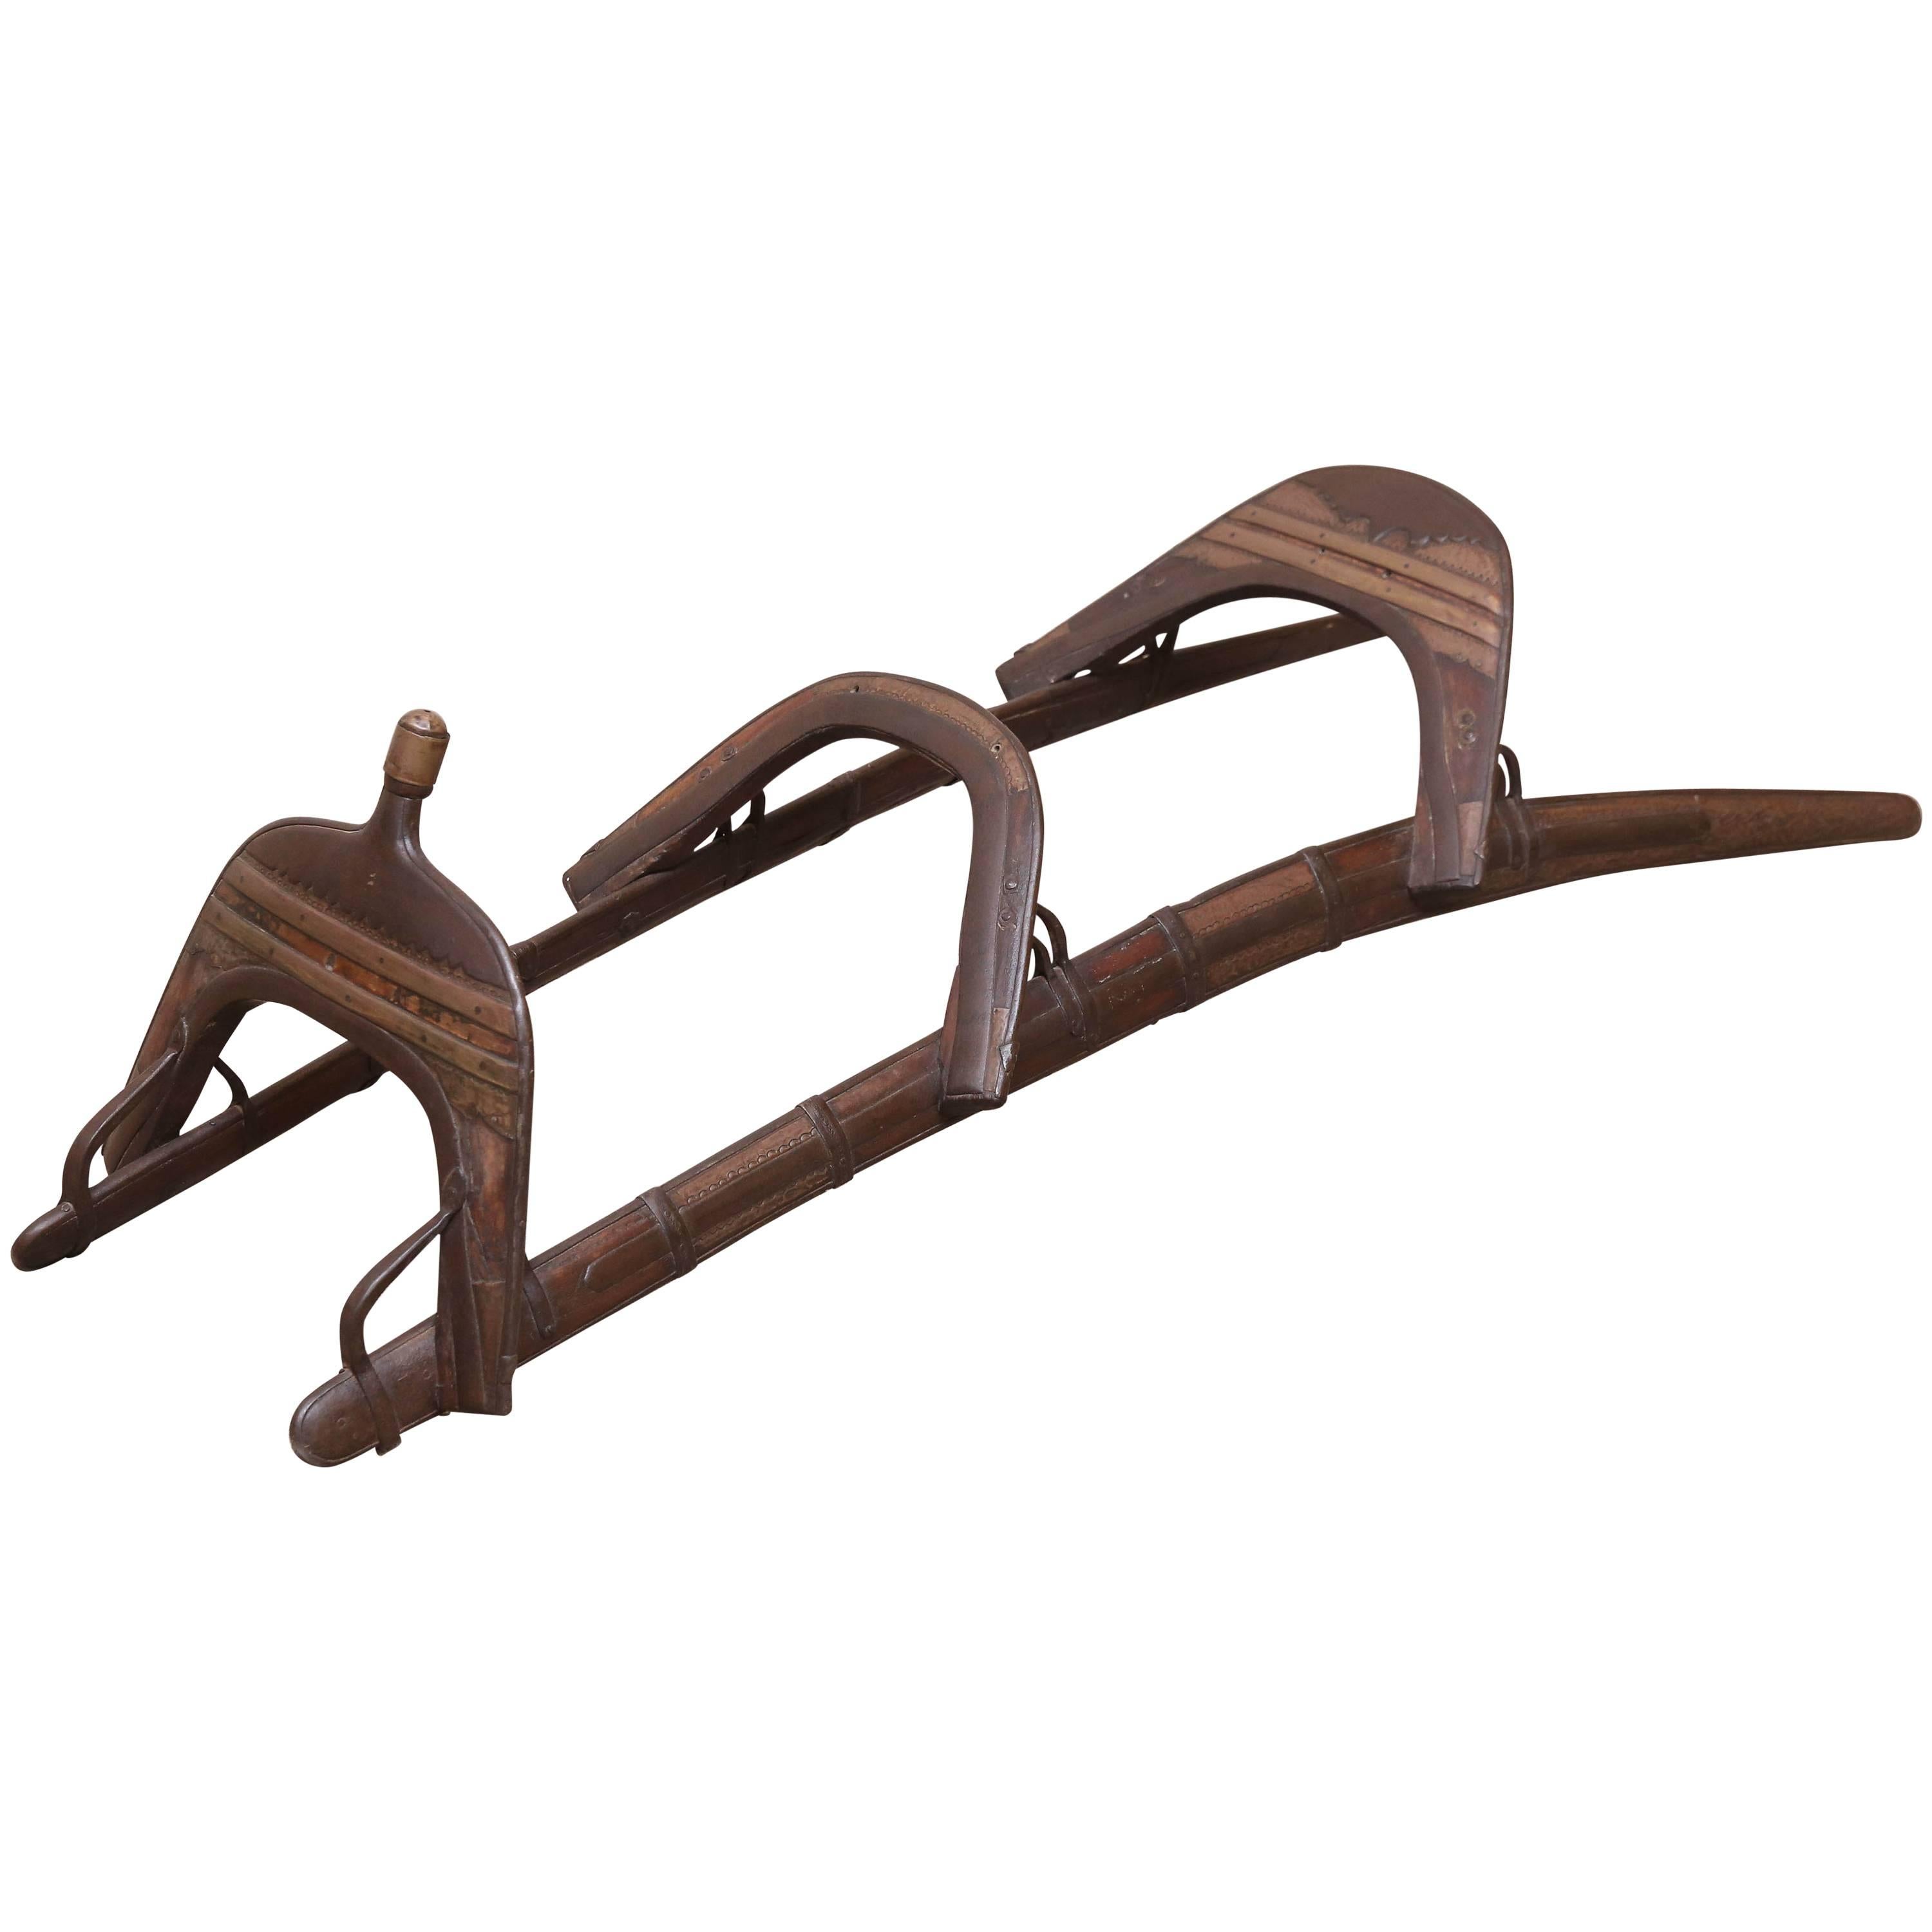 Mid-19th Century Wood and Metal Camel Seat Used by the Tribes in Western India For Sale